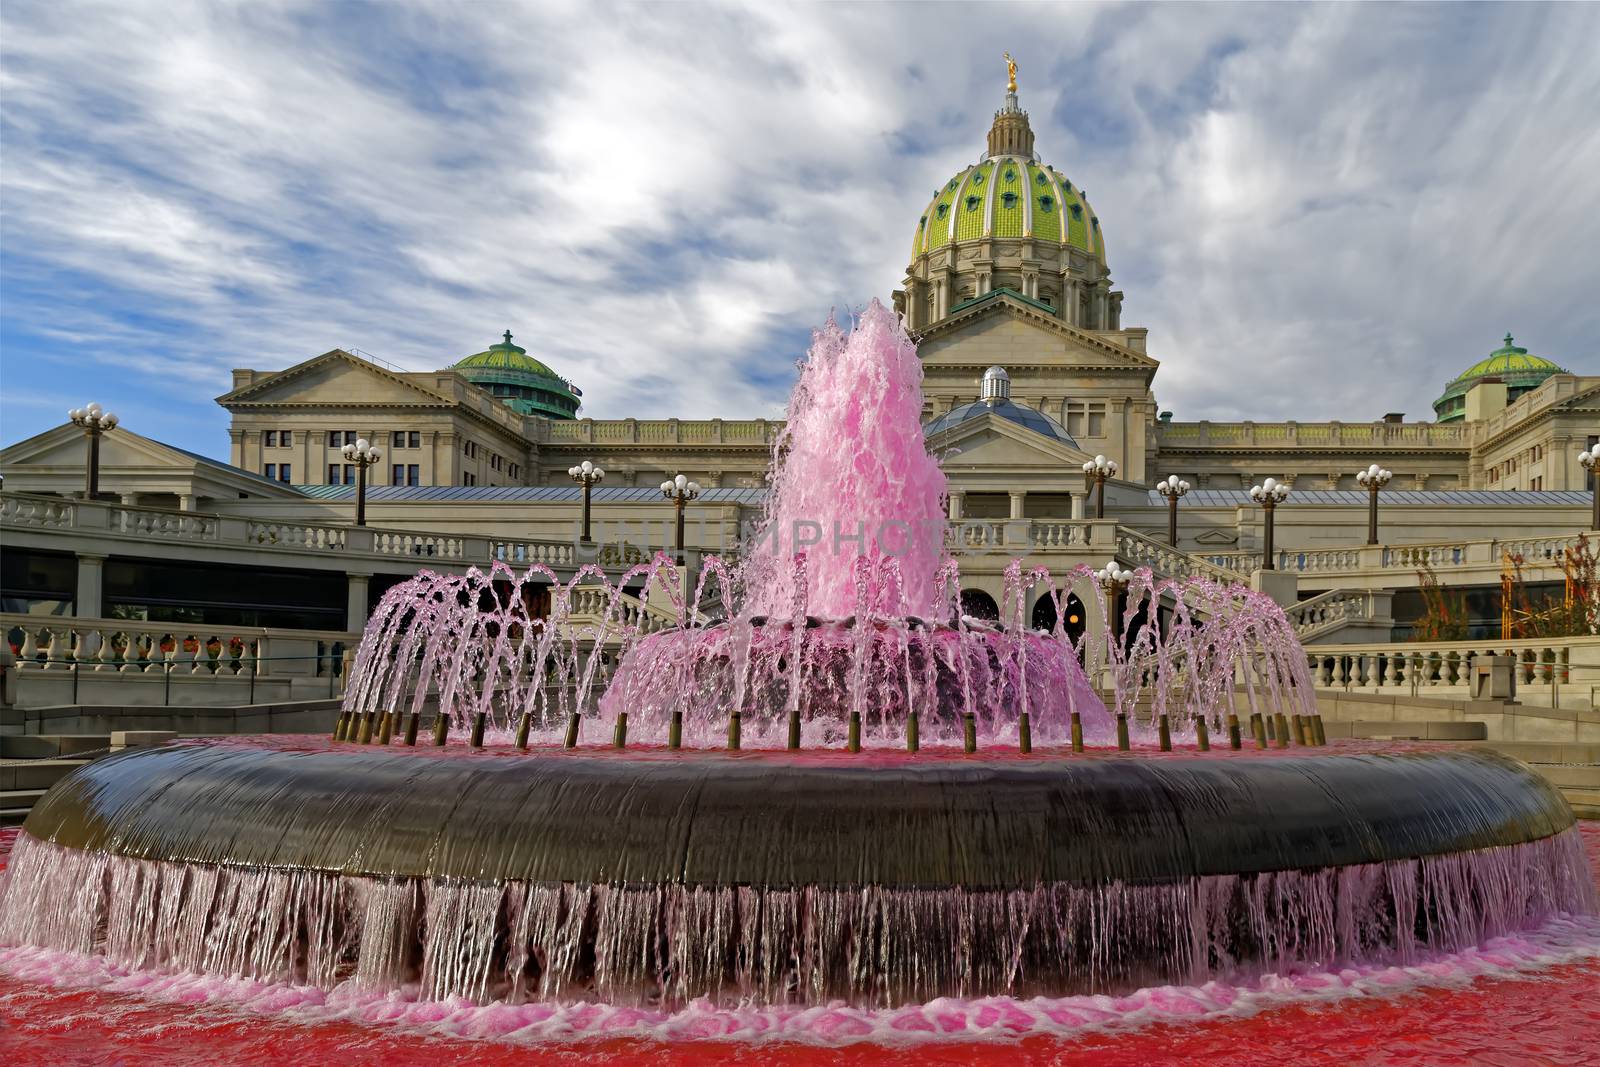 The waters in the Capitol East Wing fountain are dyed pink signifying the start of Breast Cancer Awareness Month in October. Harrisburg, Pennsylvania, USA.